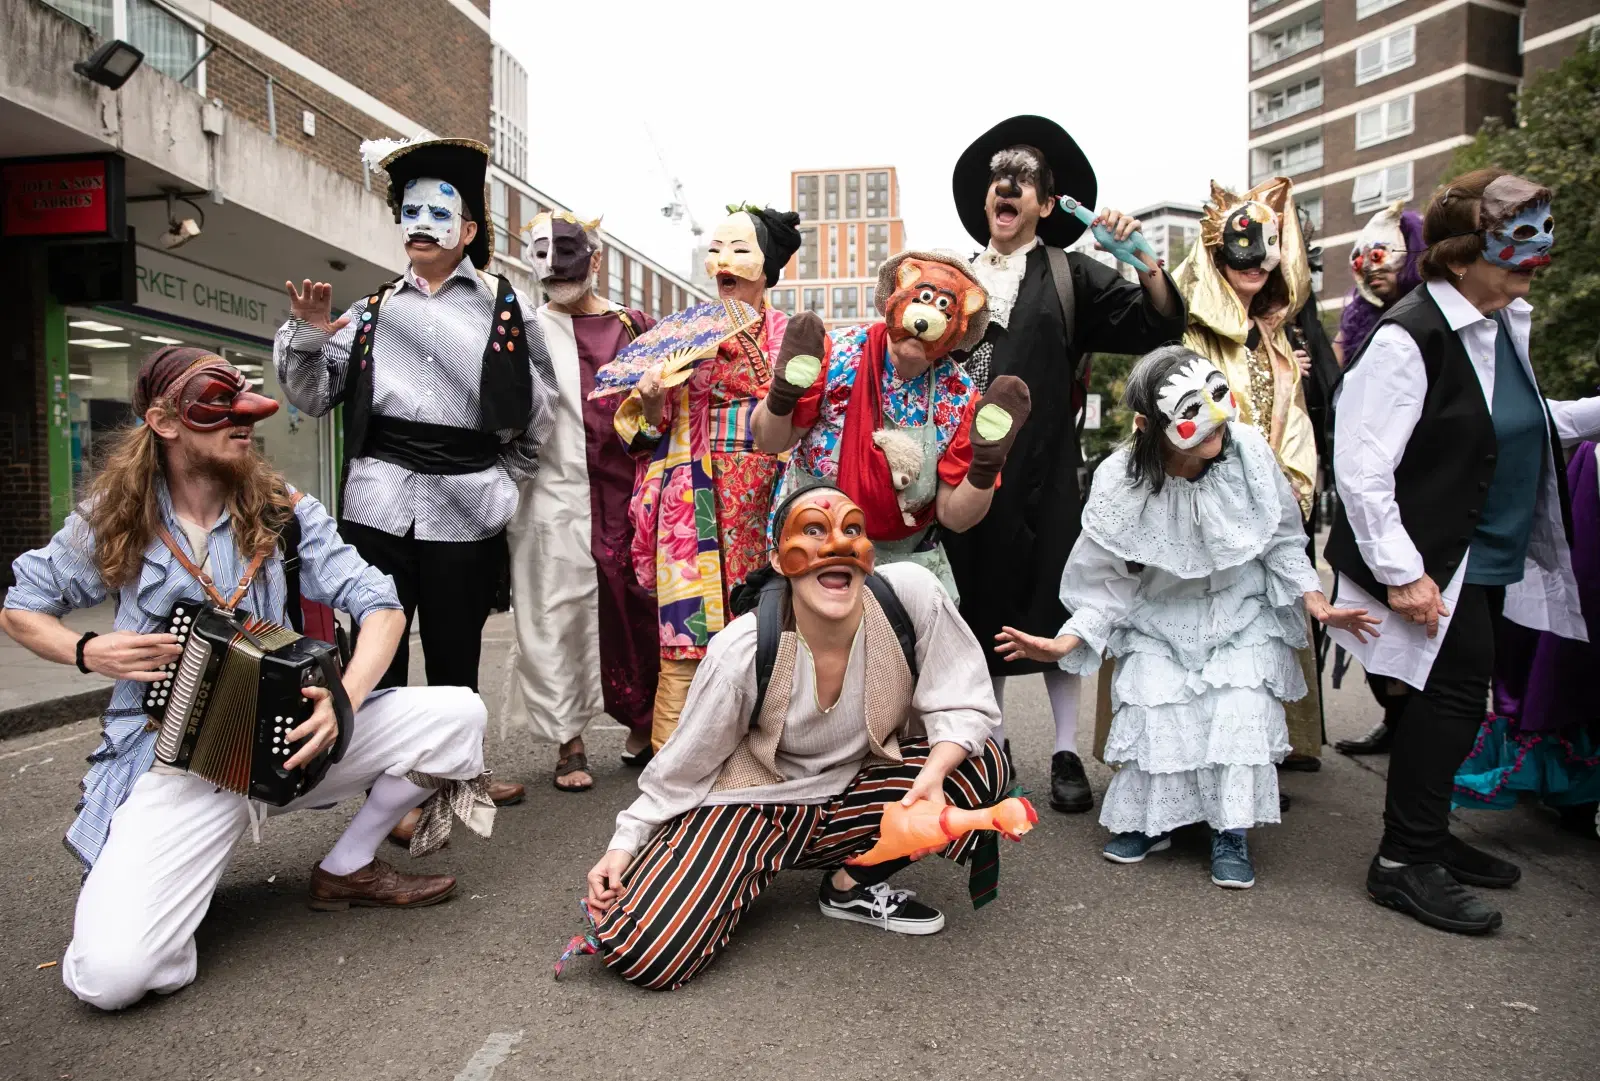 A group of individuals dressed in vibrant, eclectic costumes and masks pose theatrically on a city street. One person kneels at the front playing an accordion, while others strike expressive, playful poses. Urban buildings and shops are visible in the background.